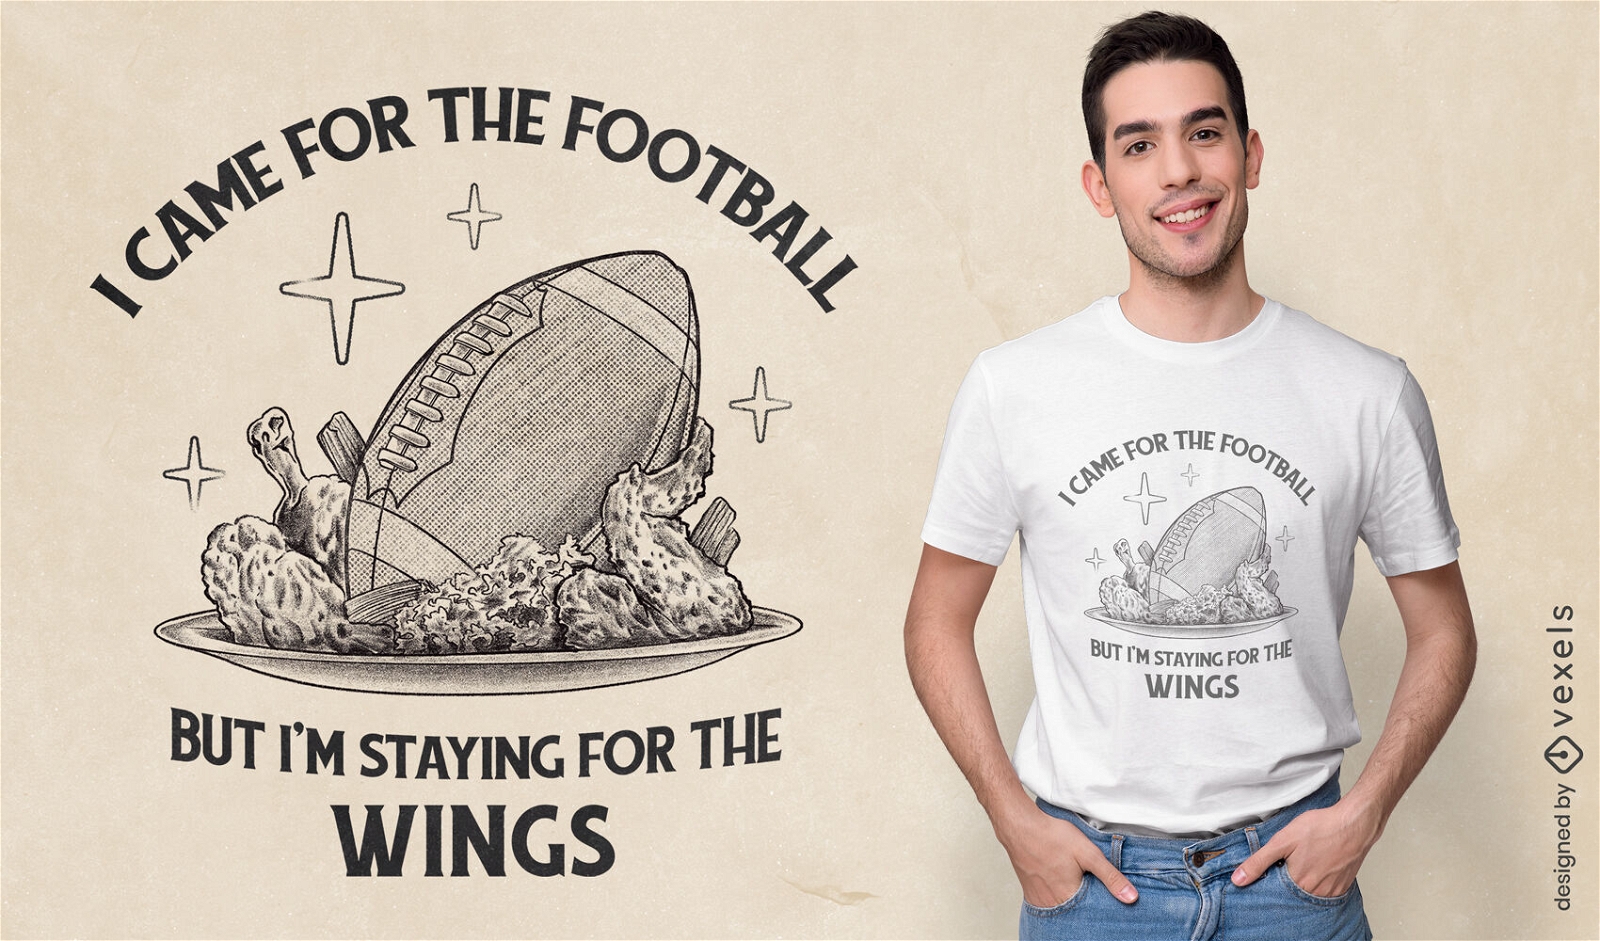 Football chicken wings quote t-shirt design